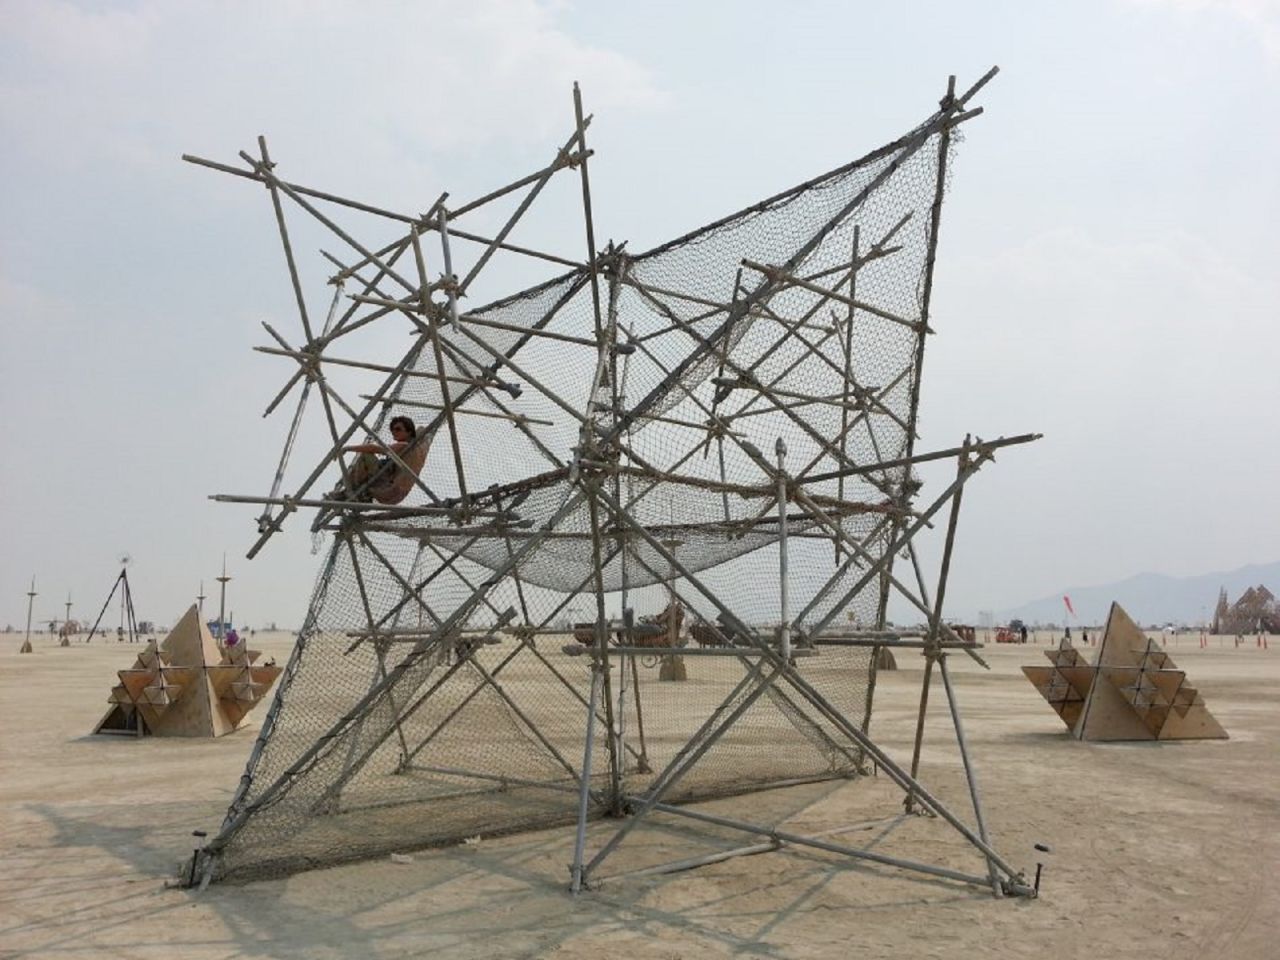 Fractal Cult, an installation for the 2013 Burning Man, was designed by Westminster University student Thanasis Korras. The geometry of the structures is strongly connected to Merkaba -- a vehicle of divine light used to transport the body and spirit to another dimension according to the Ancient Egyptian belief system. 